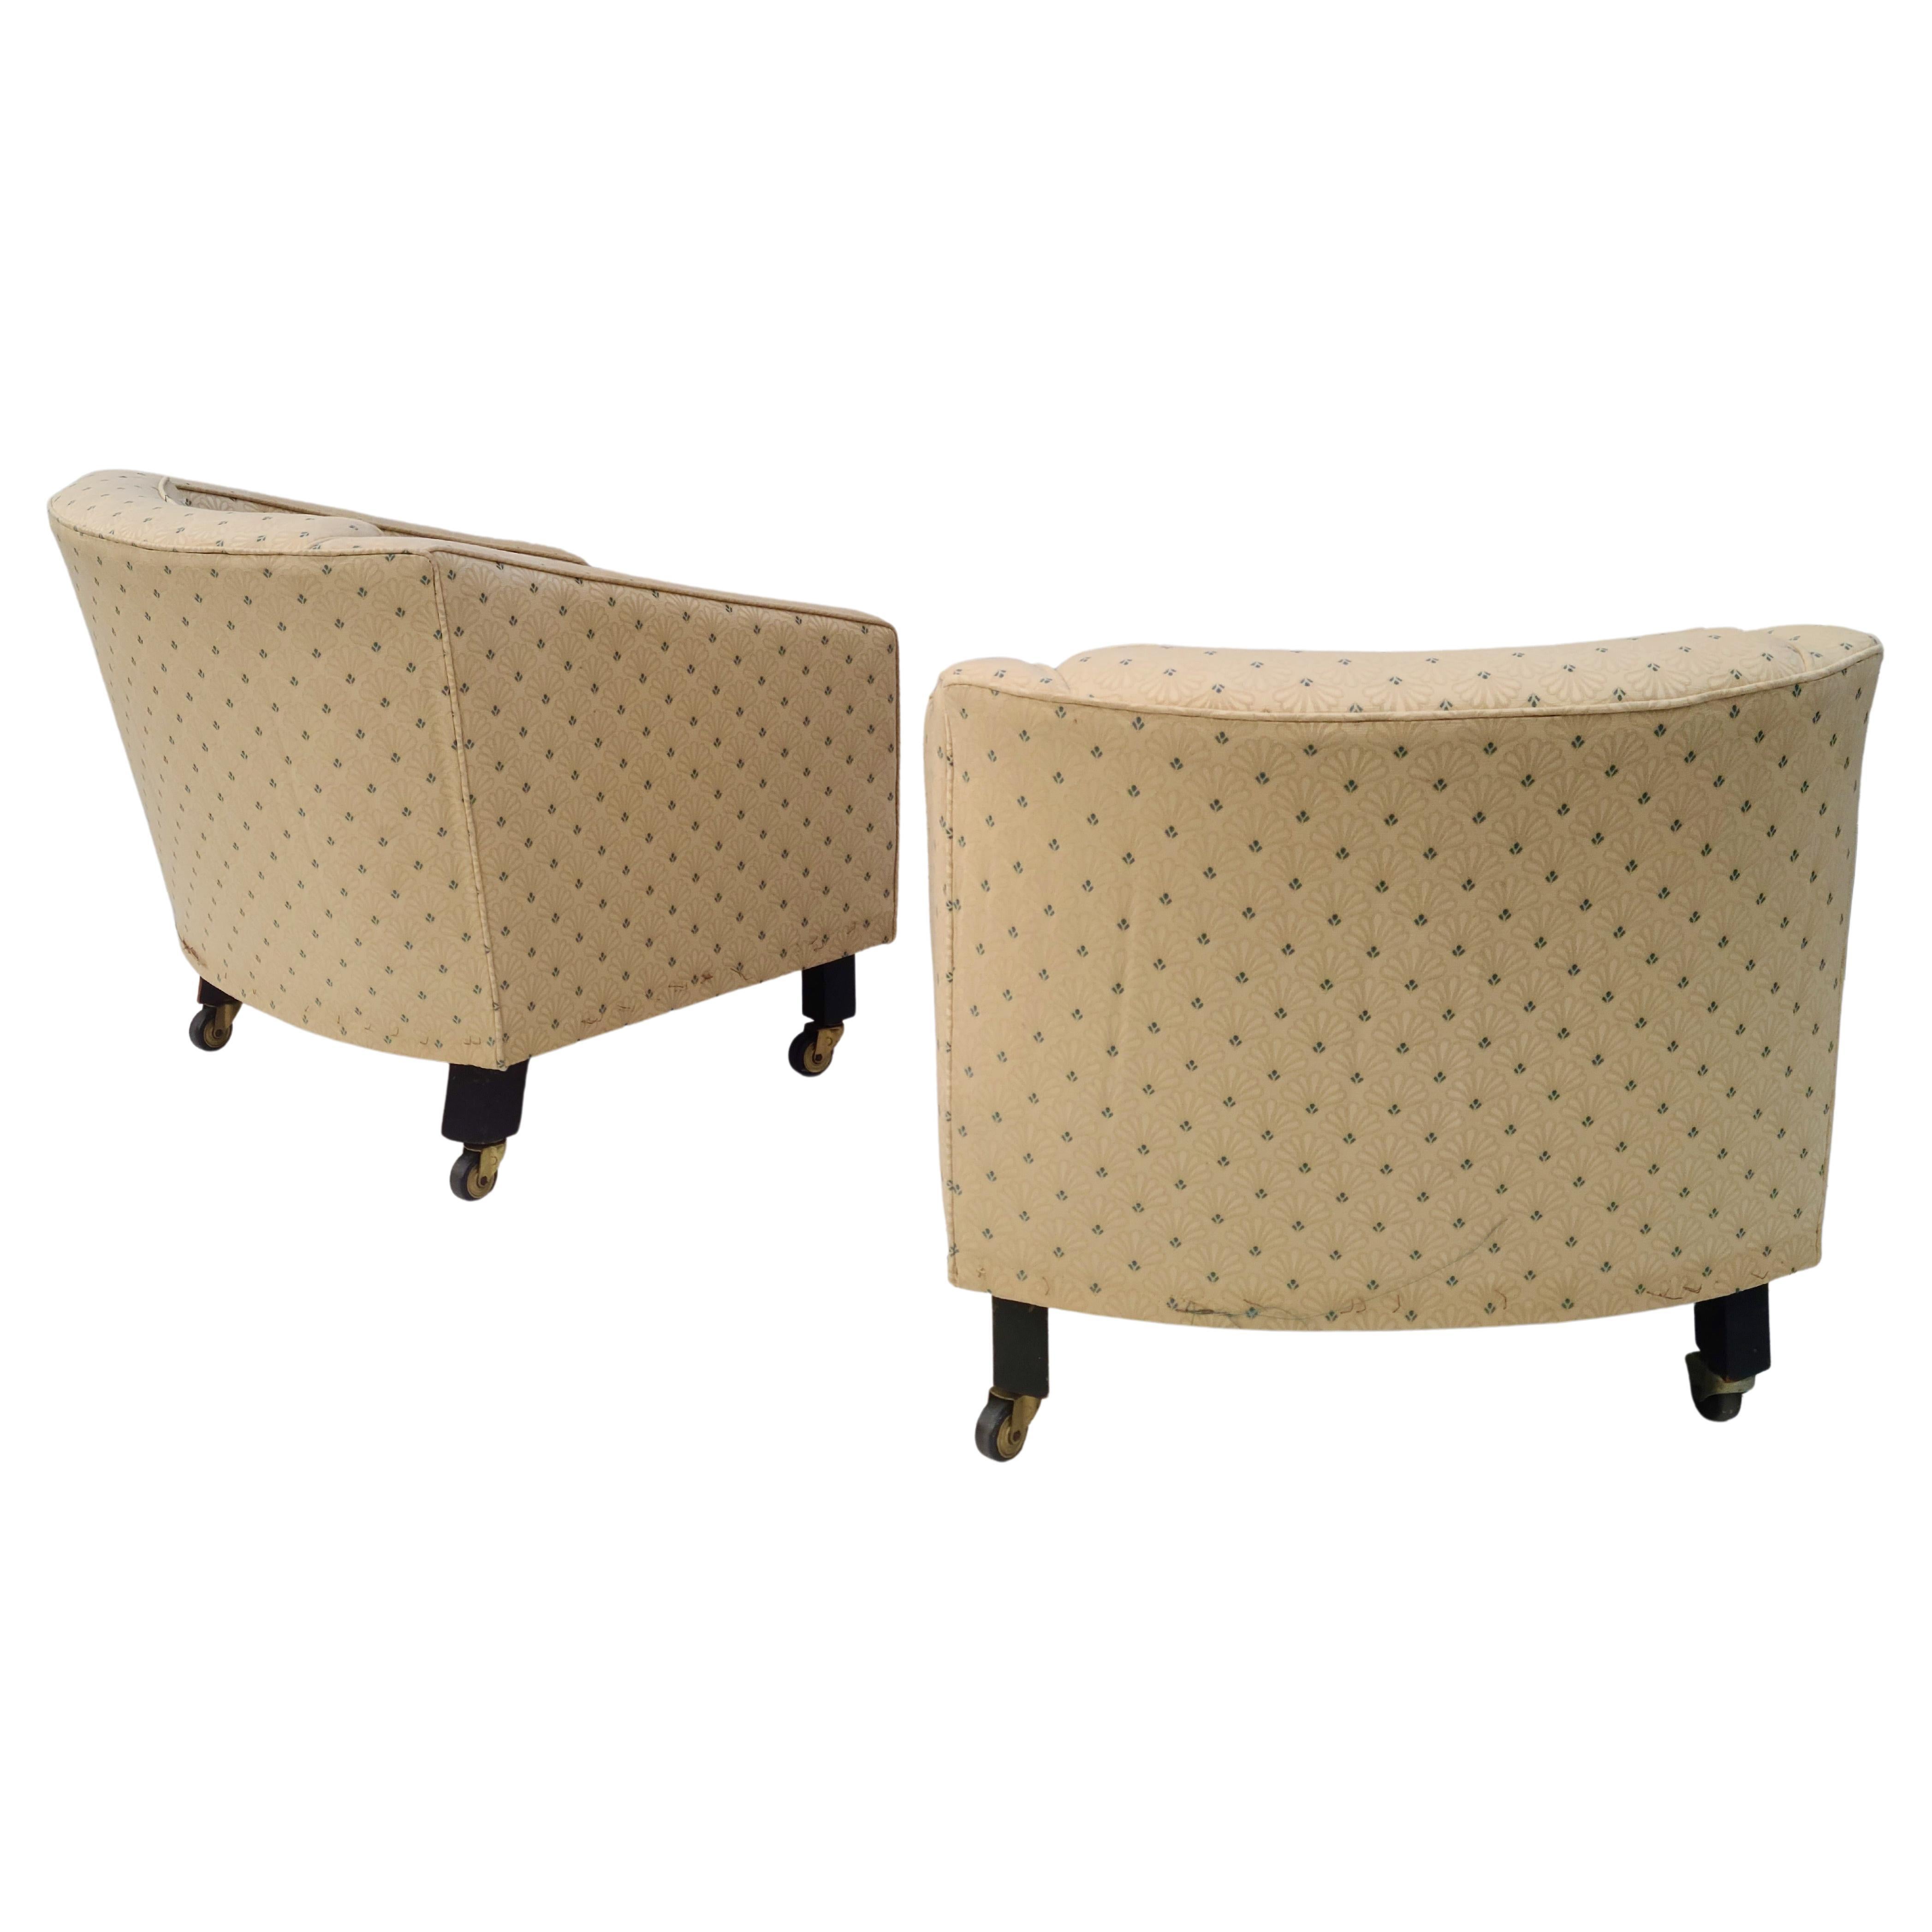 Please feel free to reach out for accurate shipping to your location.

Pair Edward Wormley for Dunbar Lounge Chairs. Wedge side profile. Slight Pie shape top profile with generous curve to backrest. Current Fabric is sun faded and usable. Back Legs